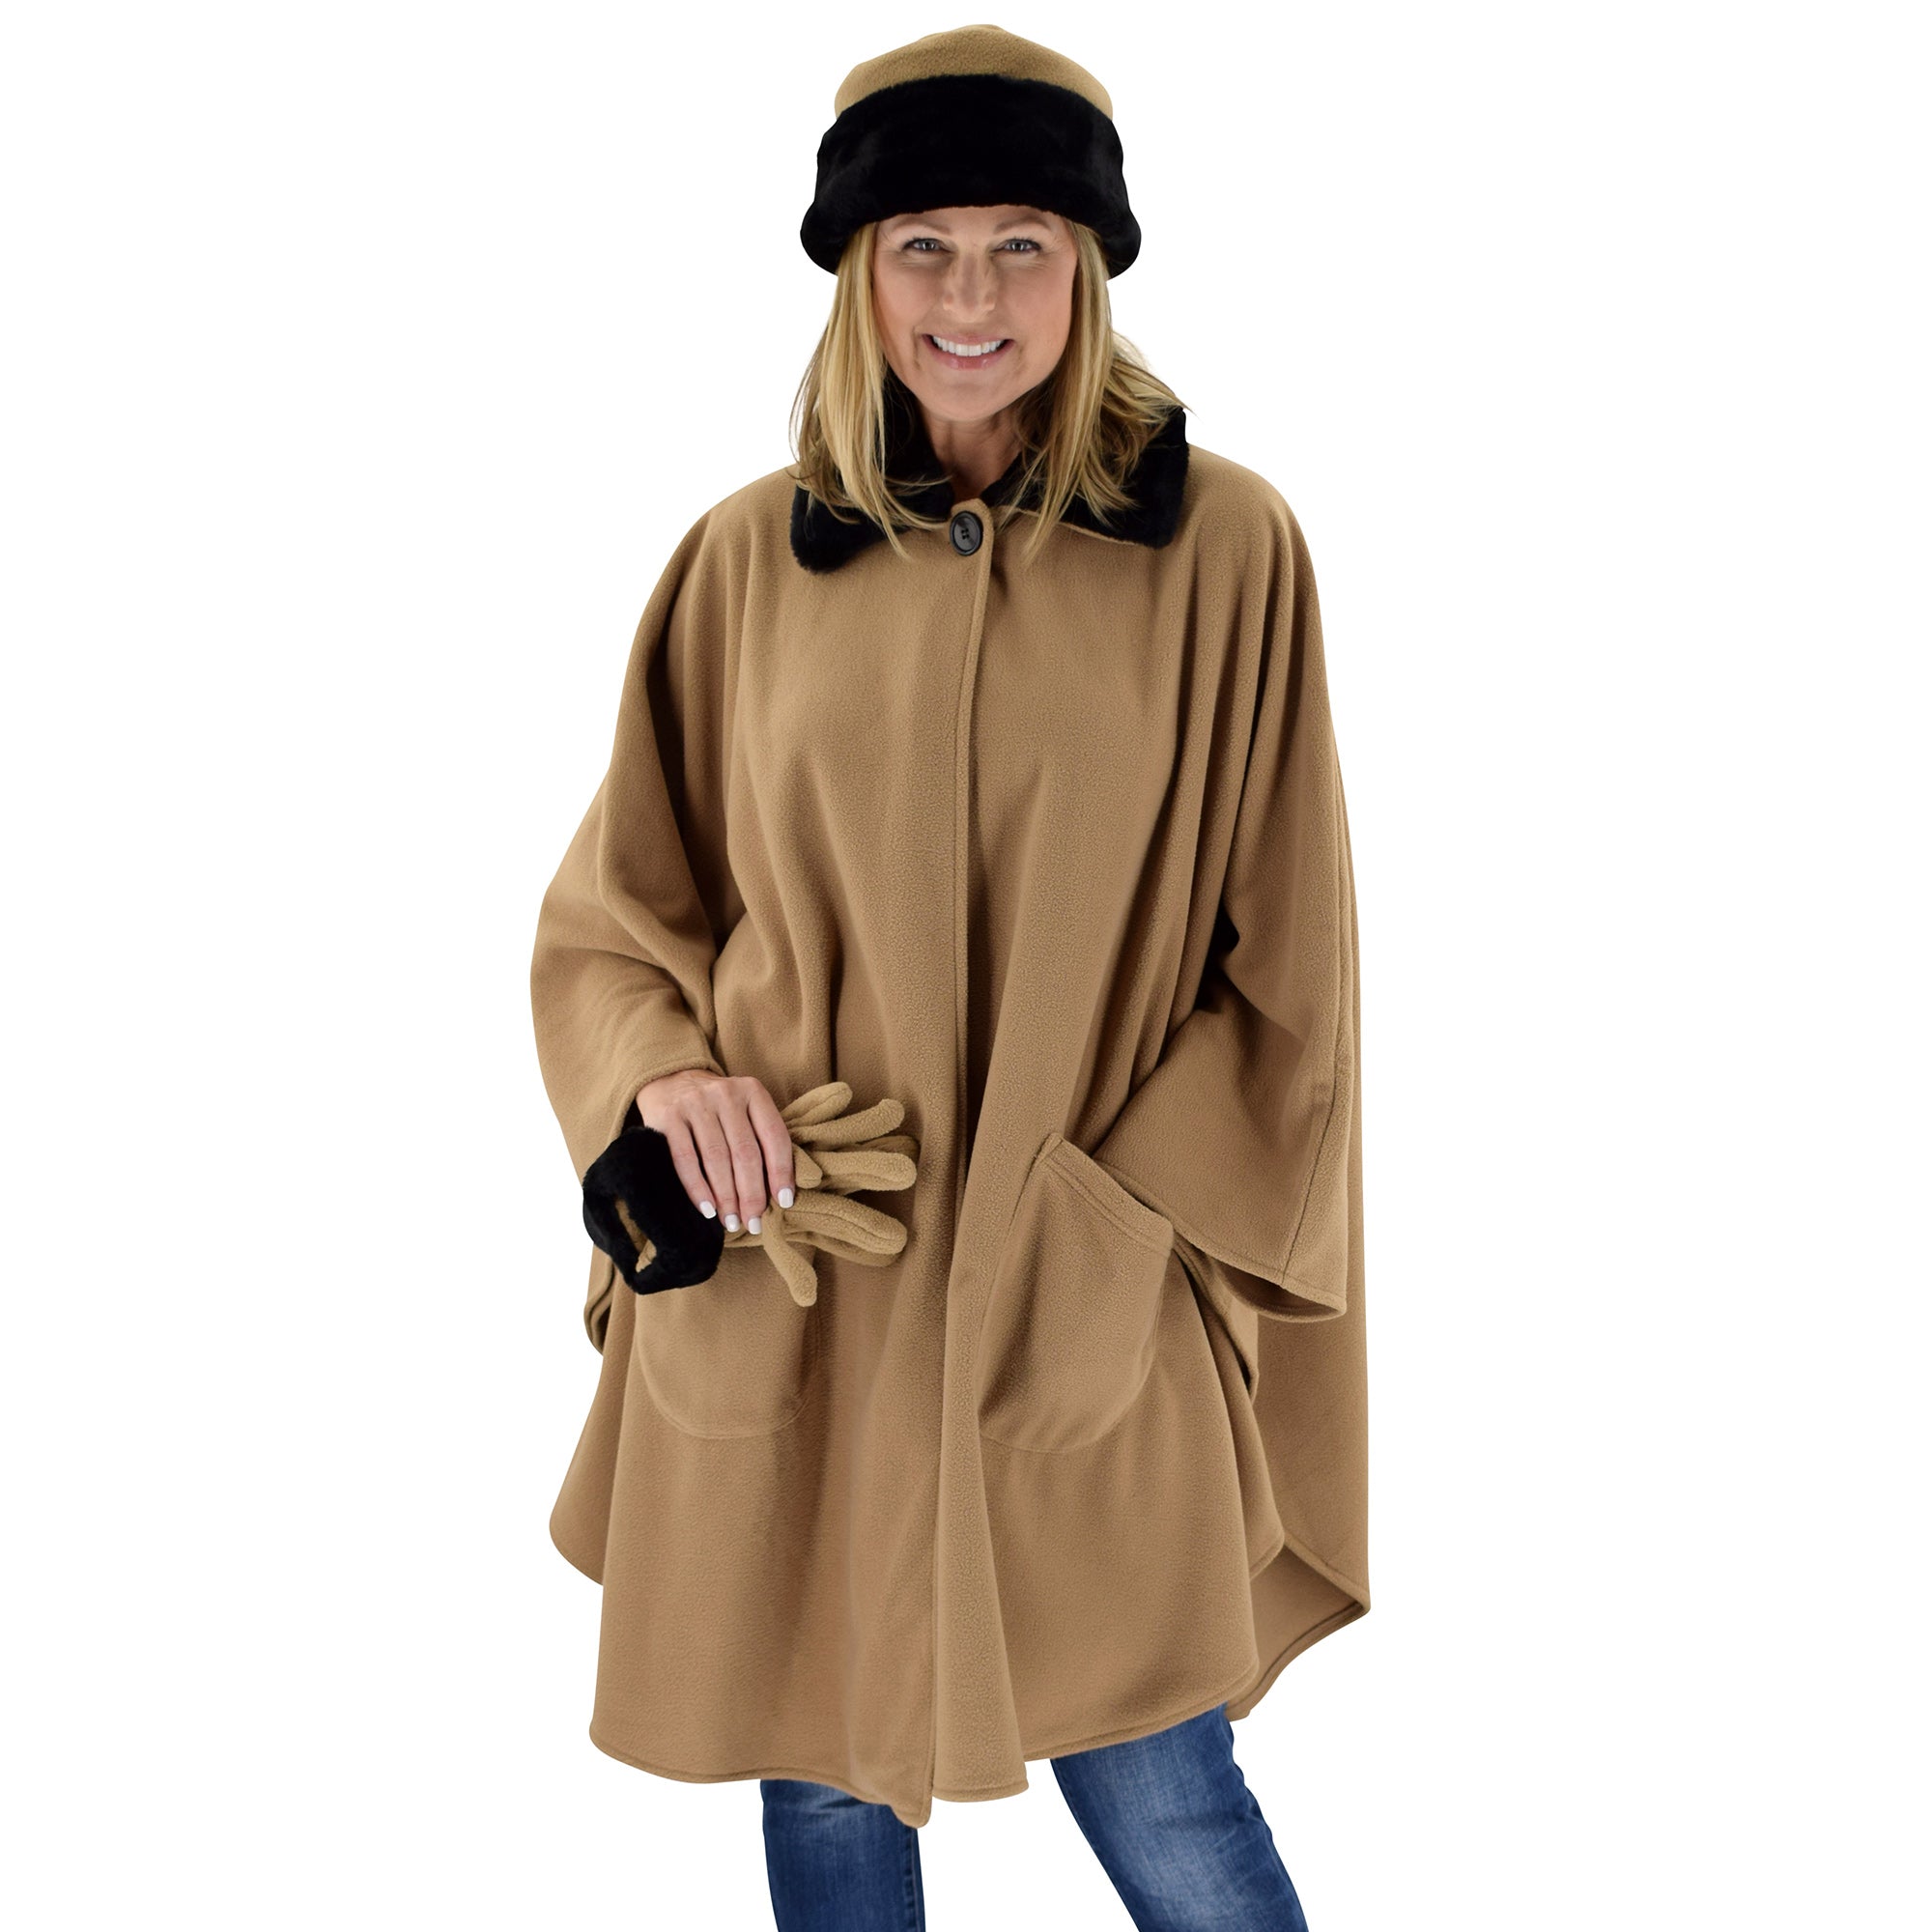 Le Moda Women's Black Fur Collar Polar Fleece Wrap with Matching Gloves and Hat-One Size Fits All at Linda Anderson.  color_camel